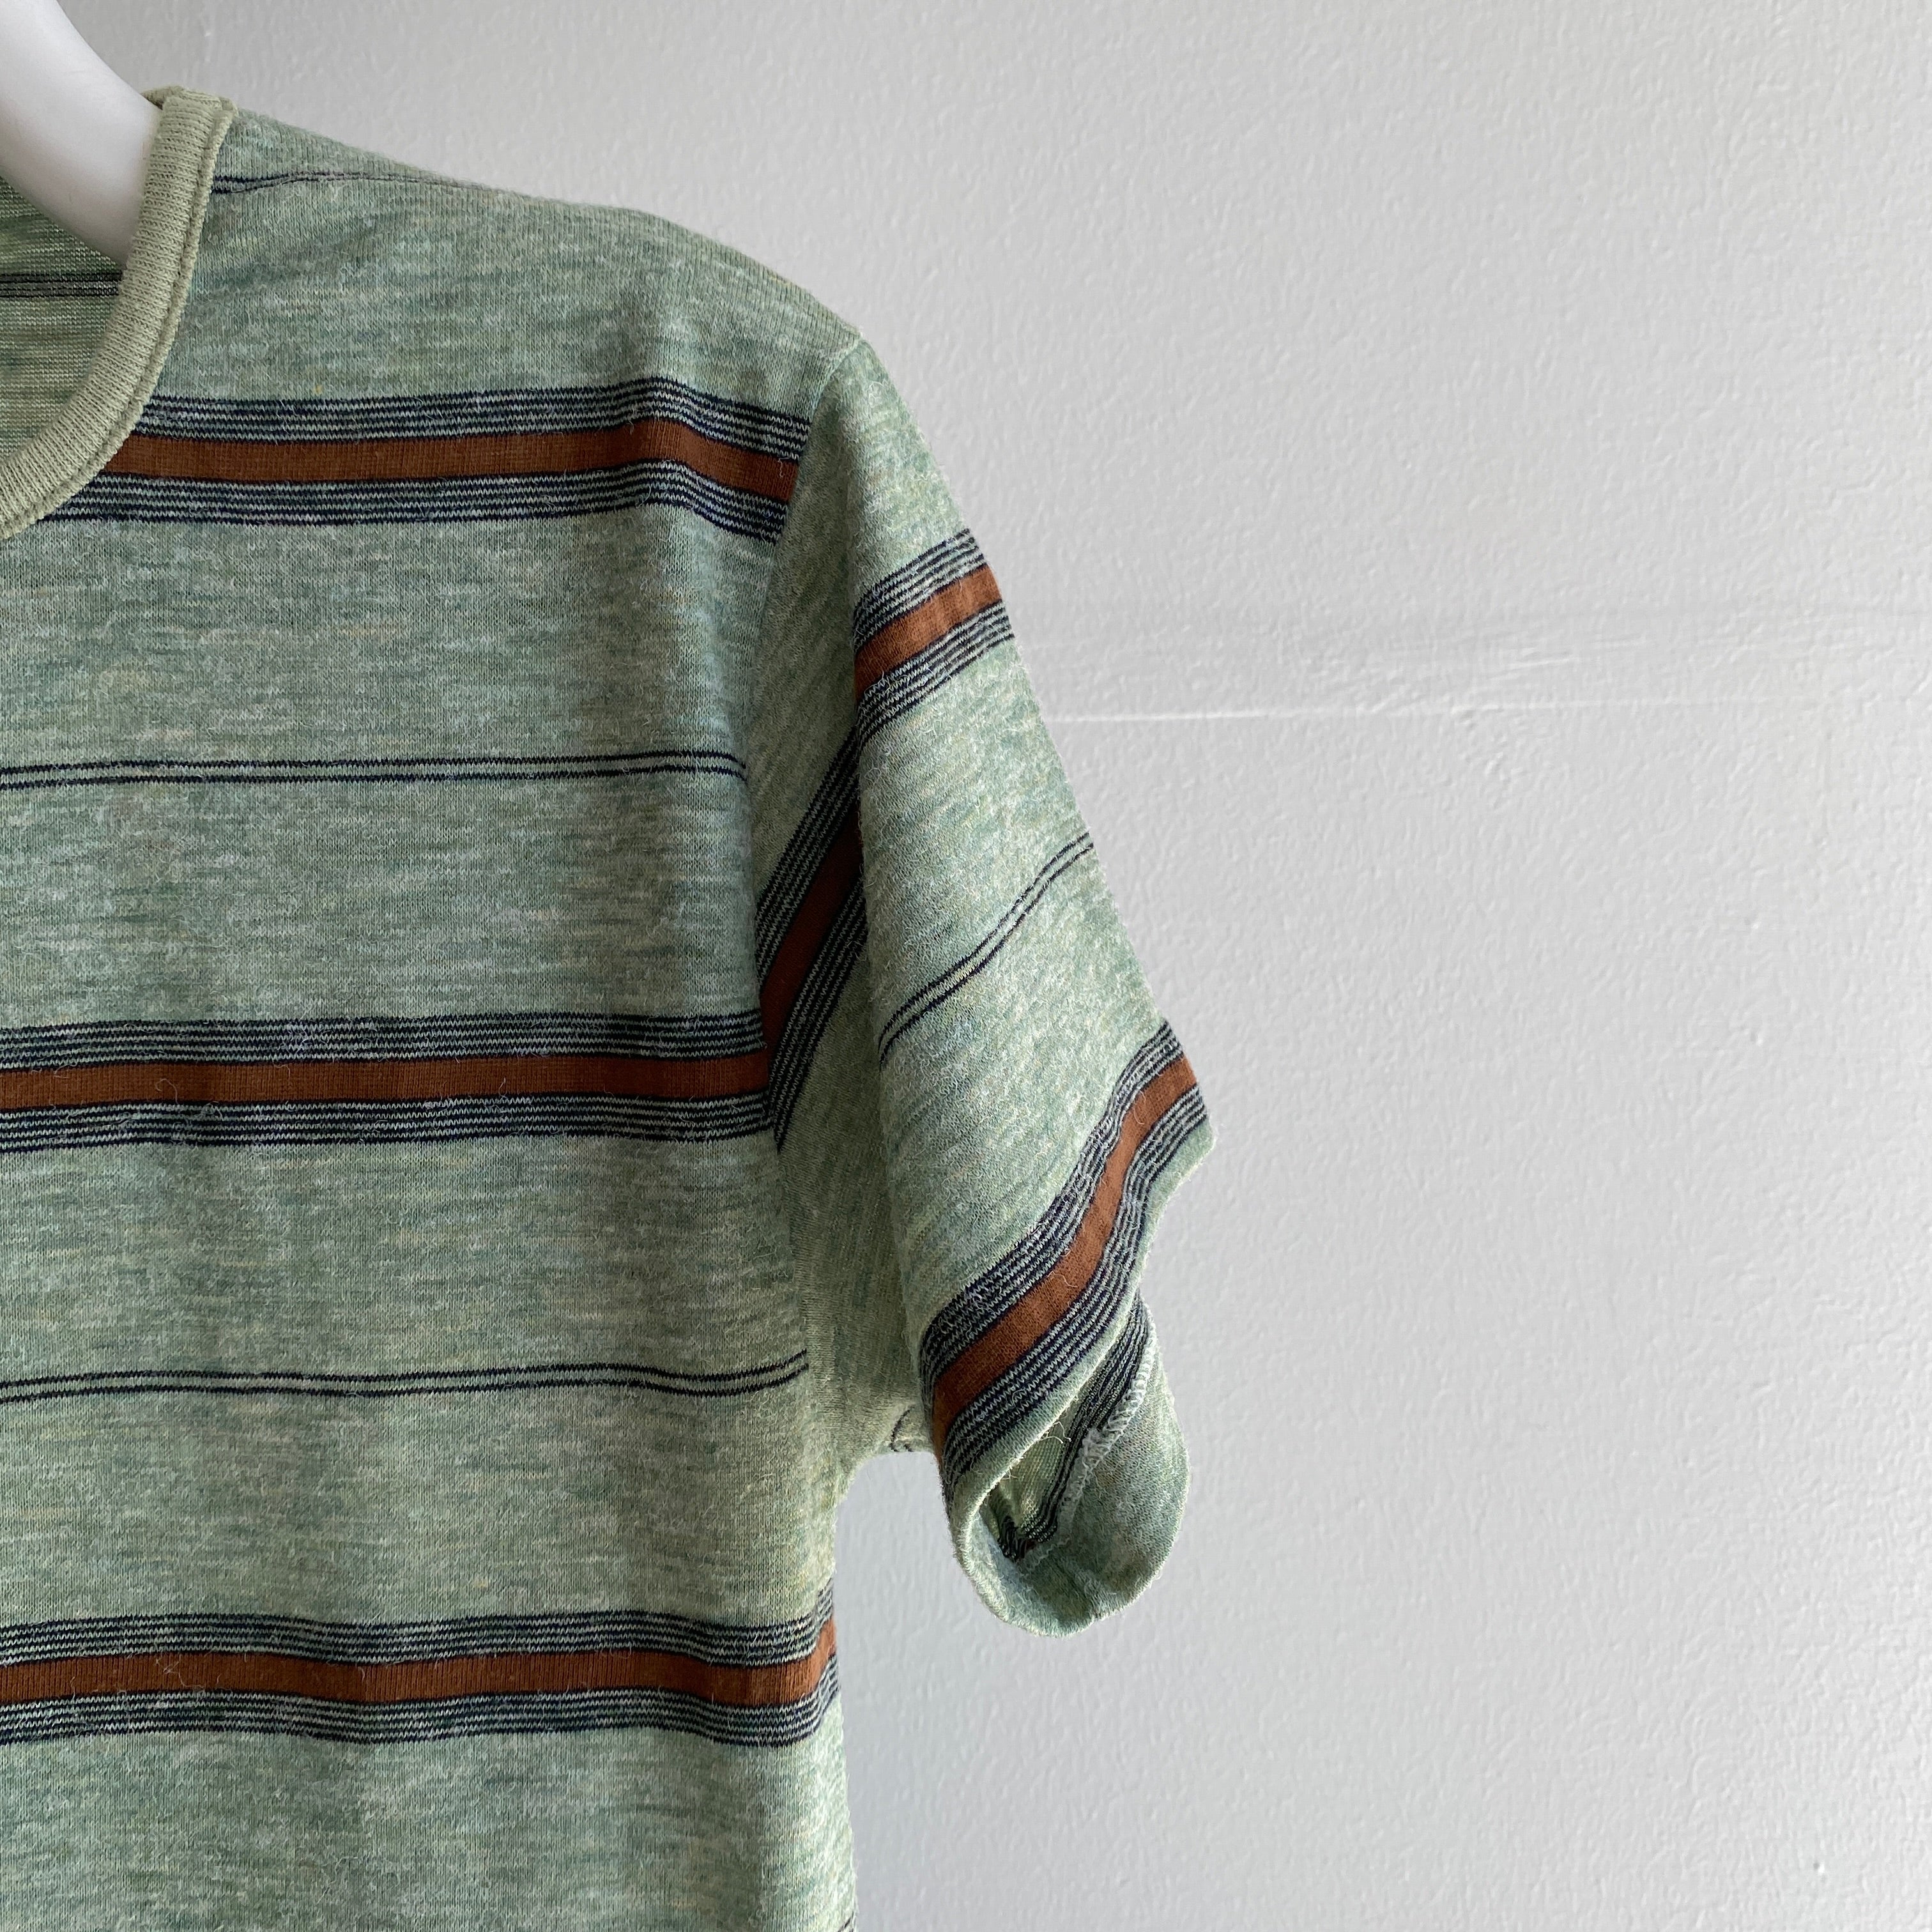 1980s Striped T-Shirt with Rolled Collar